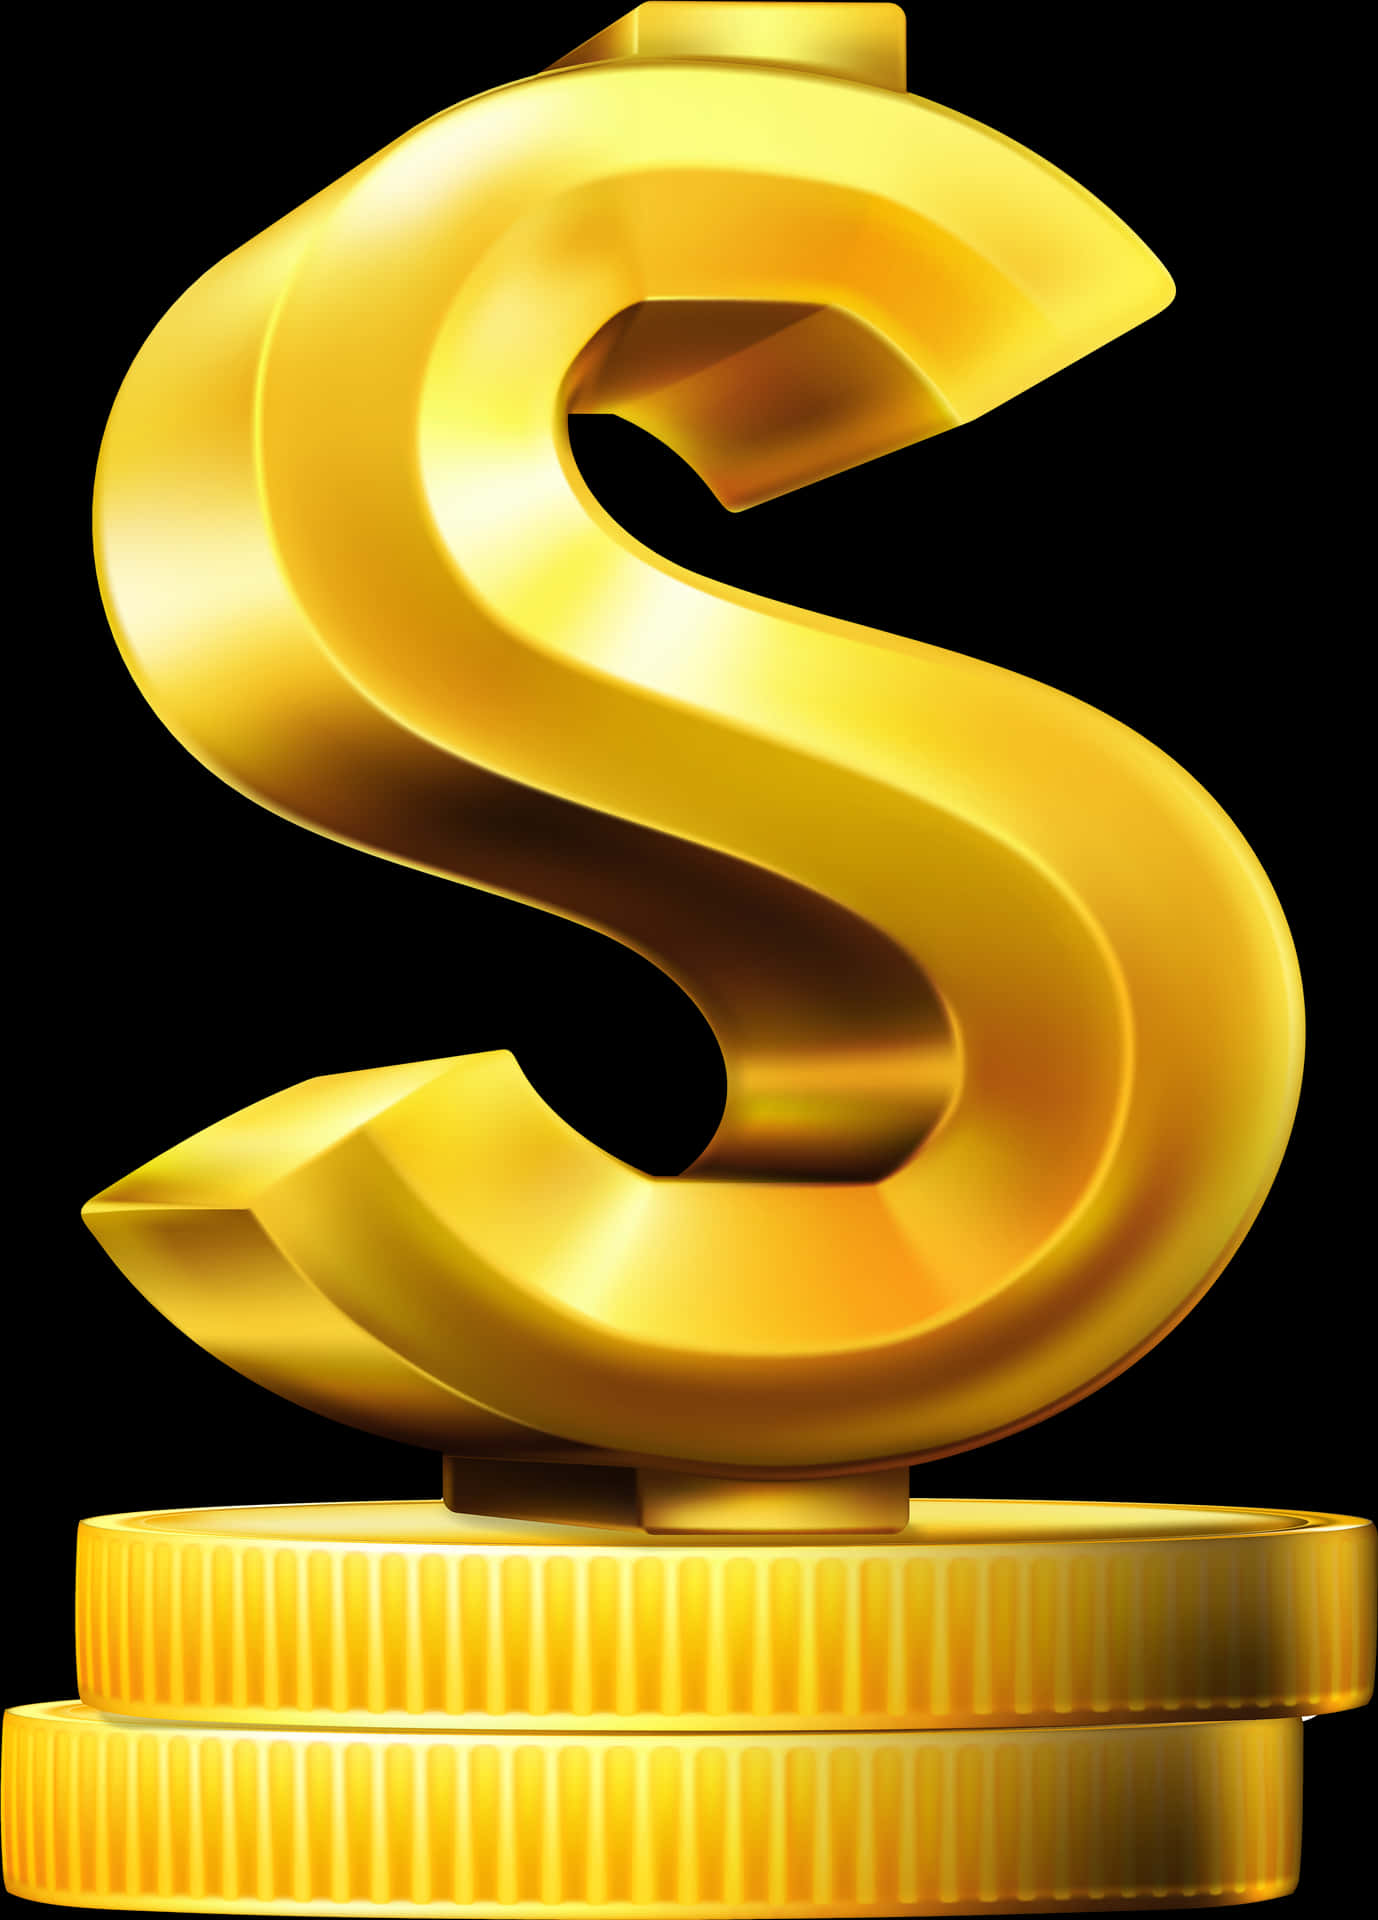 Golden Dollar Sign Standing On Coins PNG